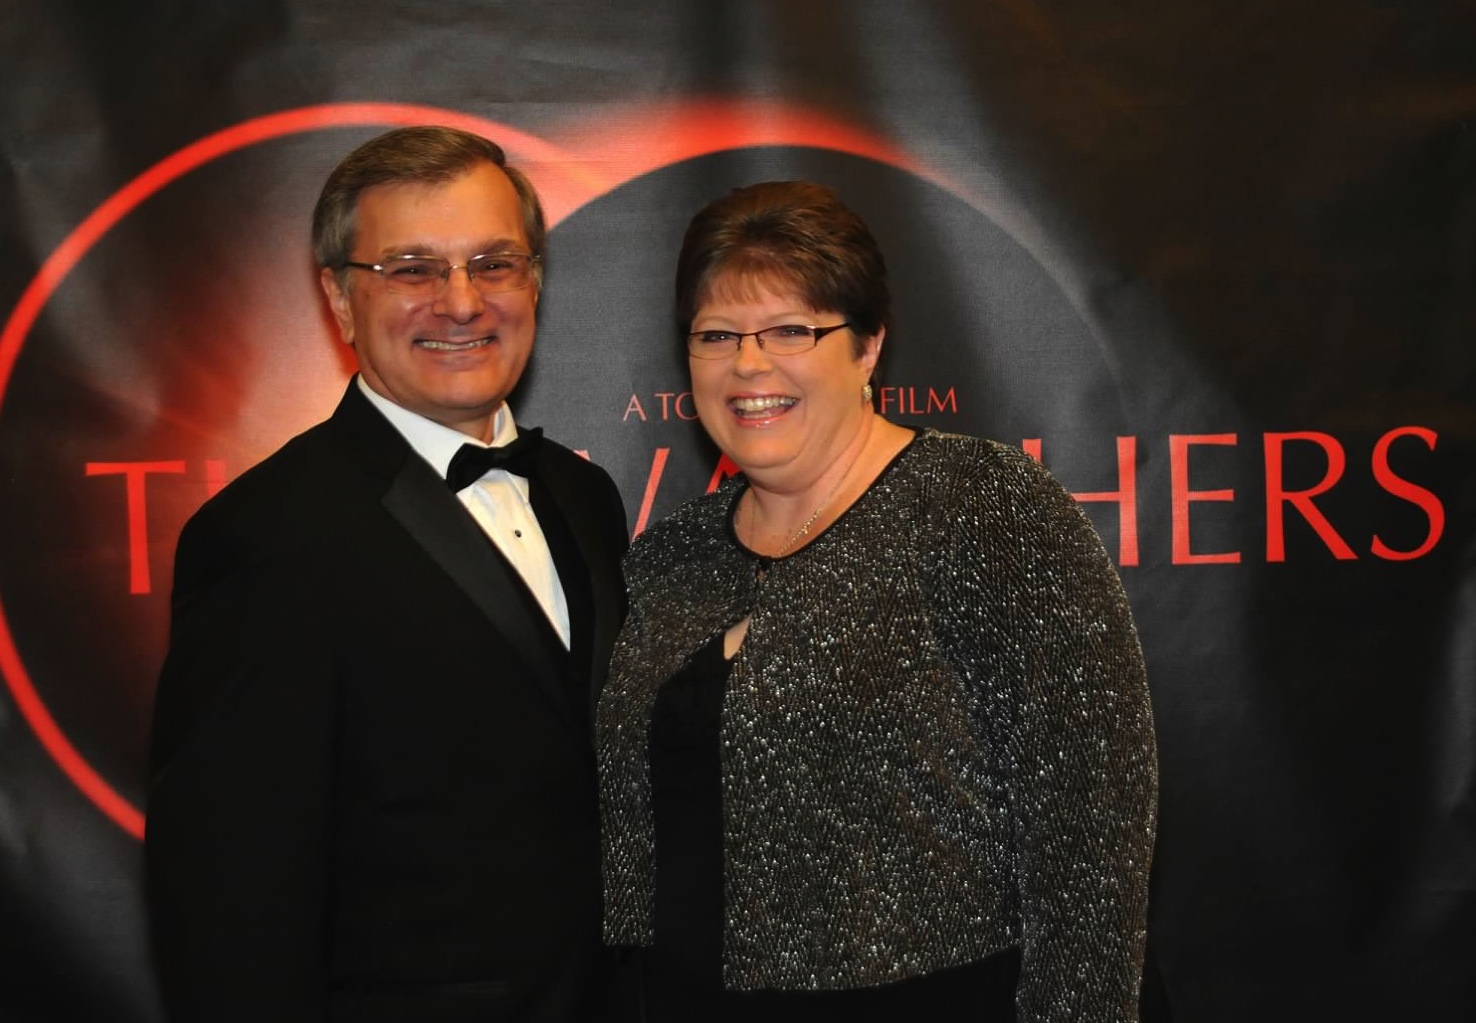 Premiere of The Watchers: Revelation. Tom Dallis with wife Amy